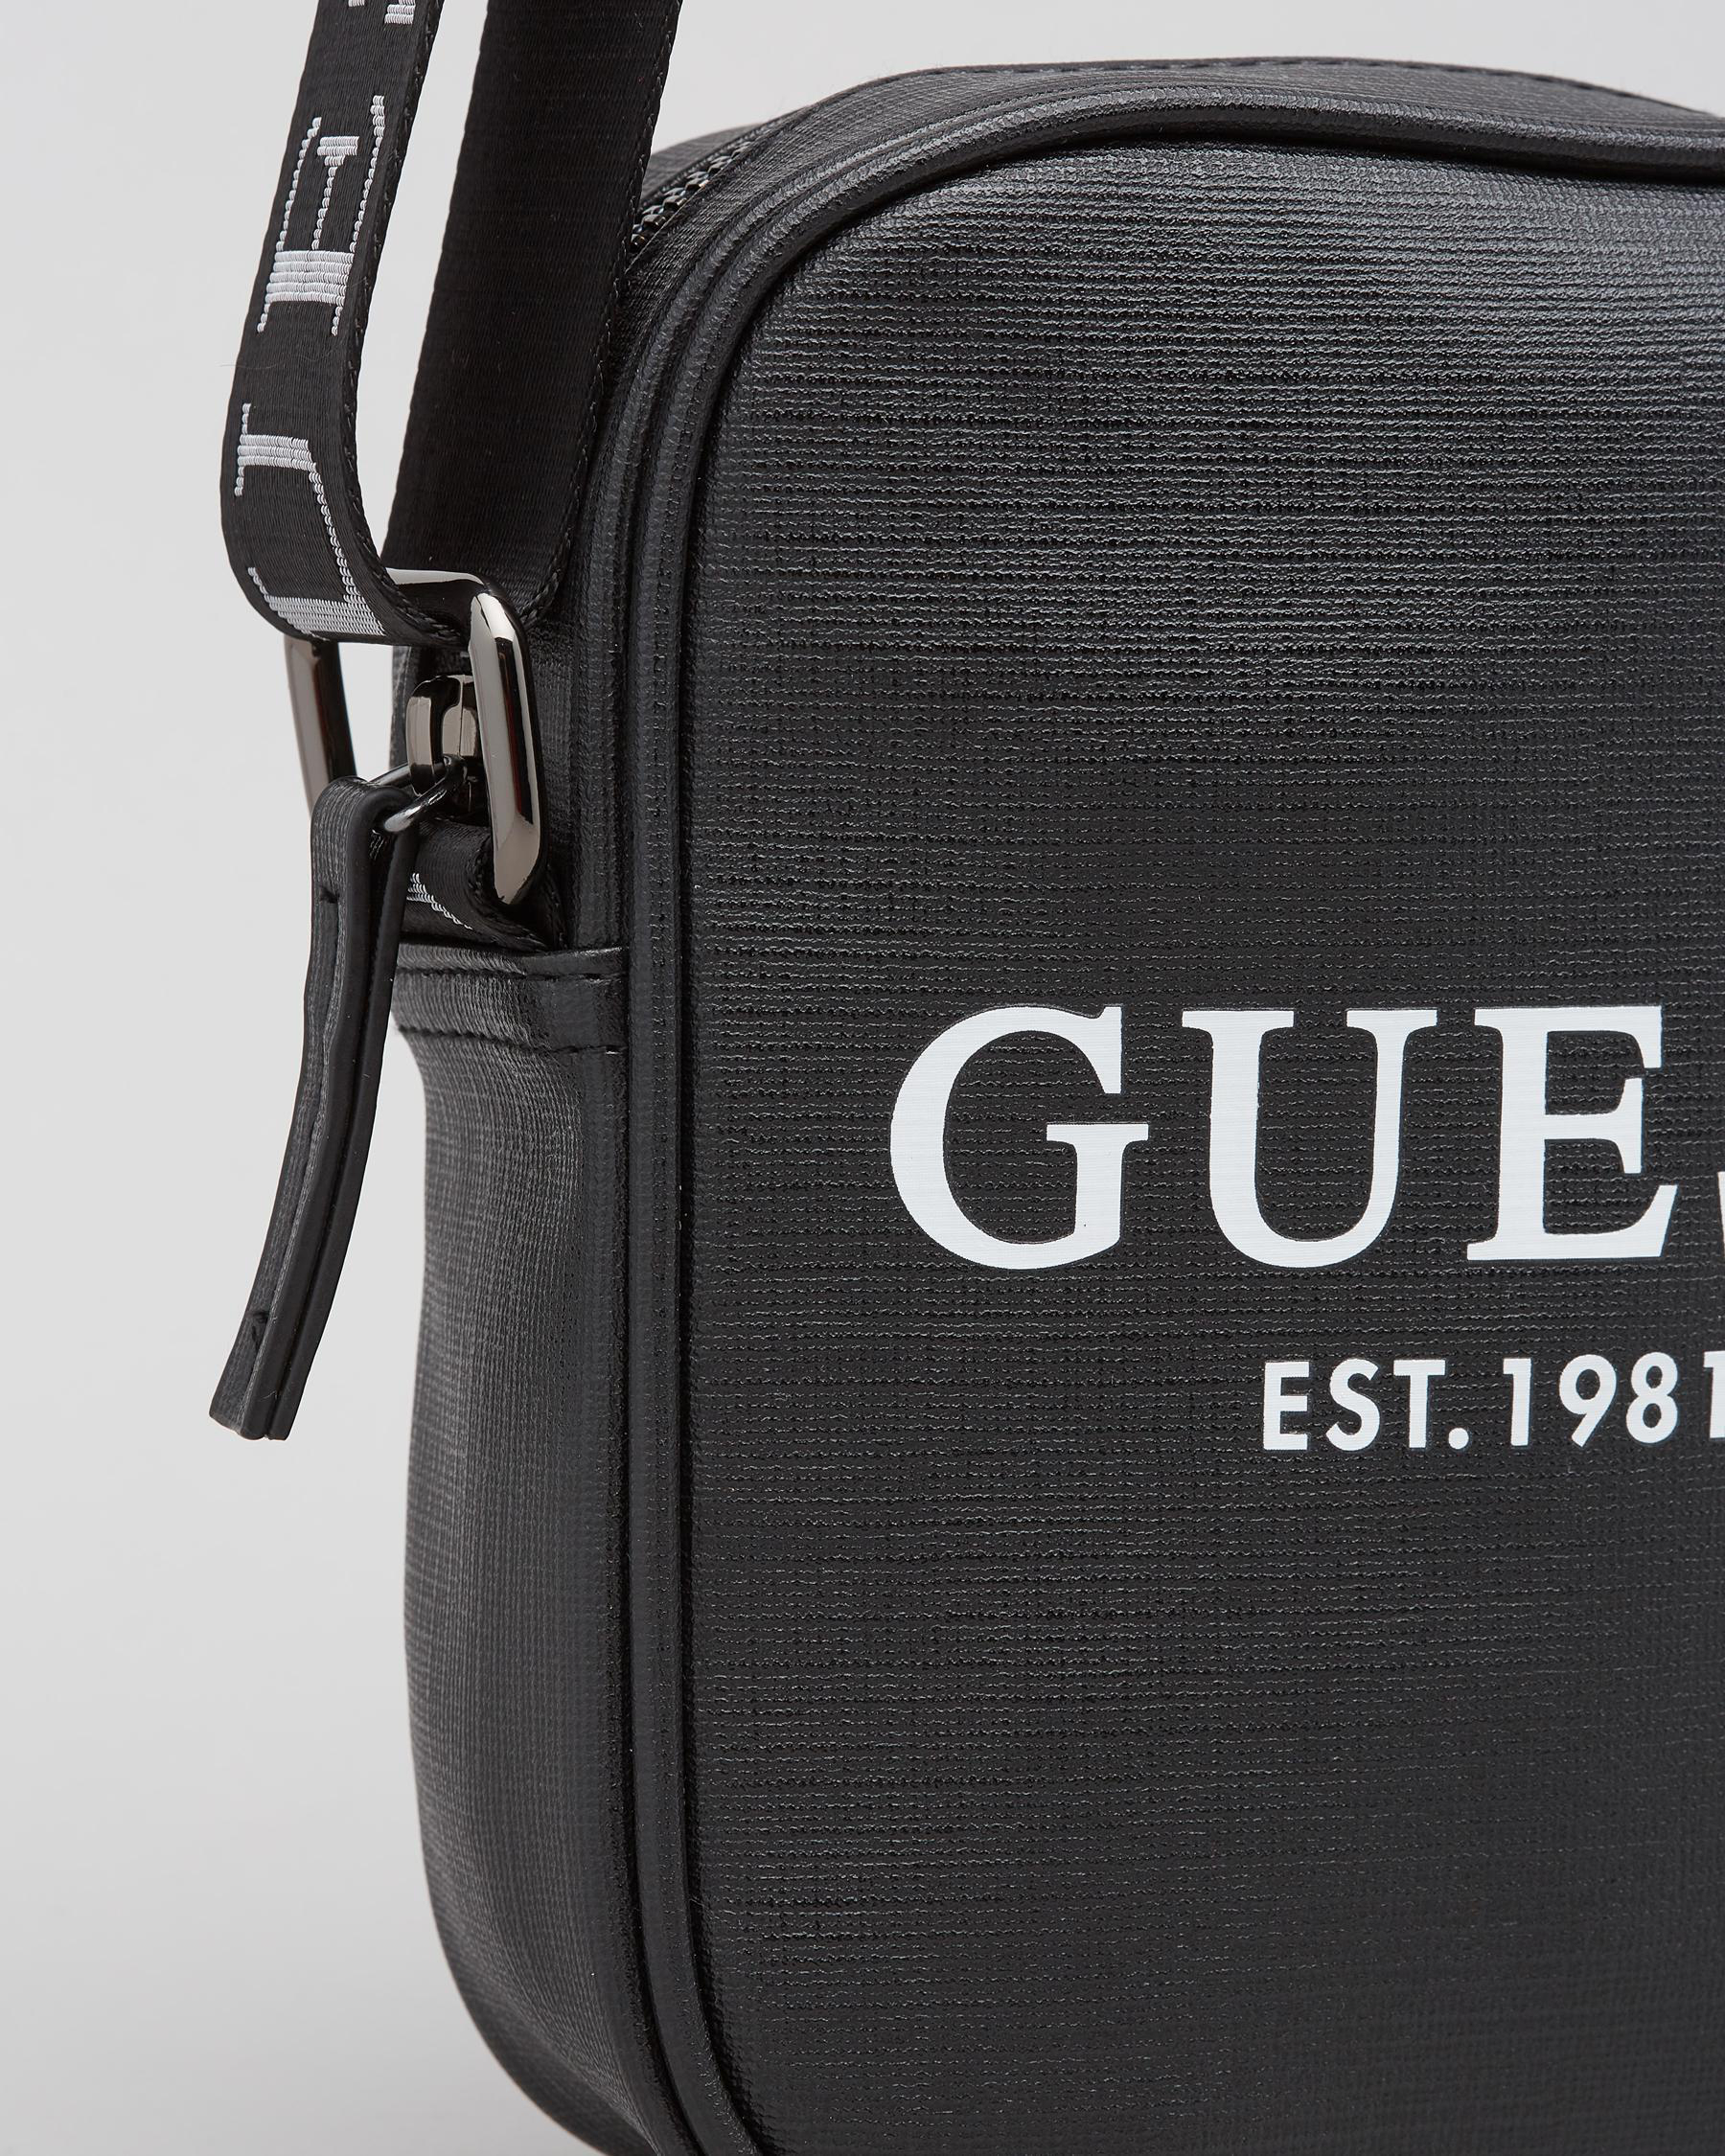 GUESS Outfitter Crossbody Bag In Black - FREE* Shipping & Easy